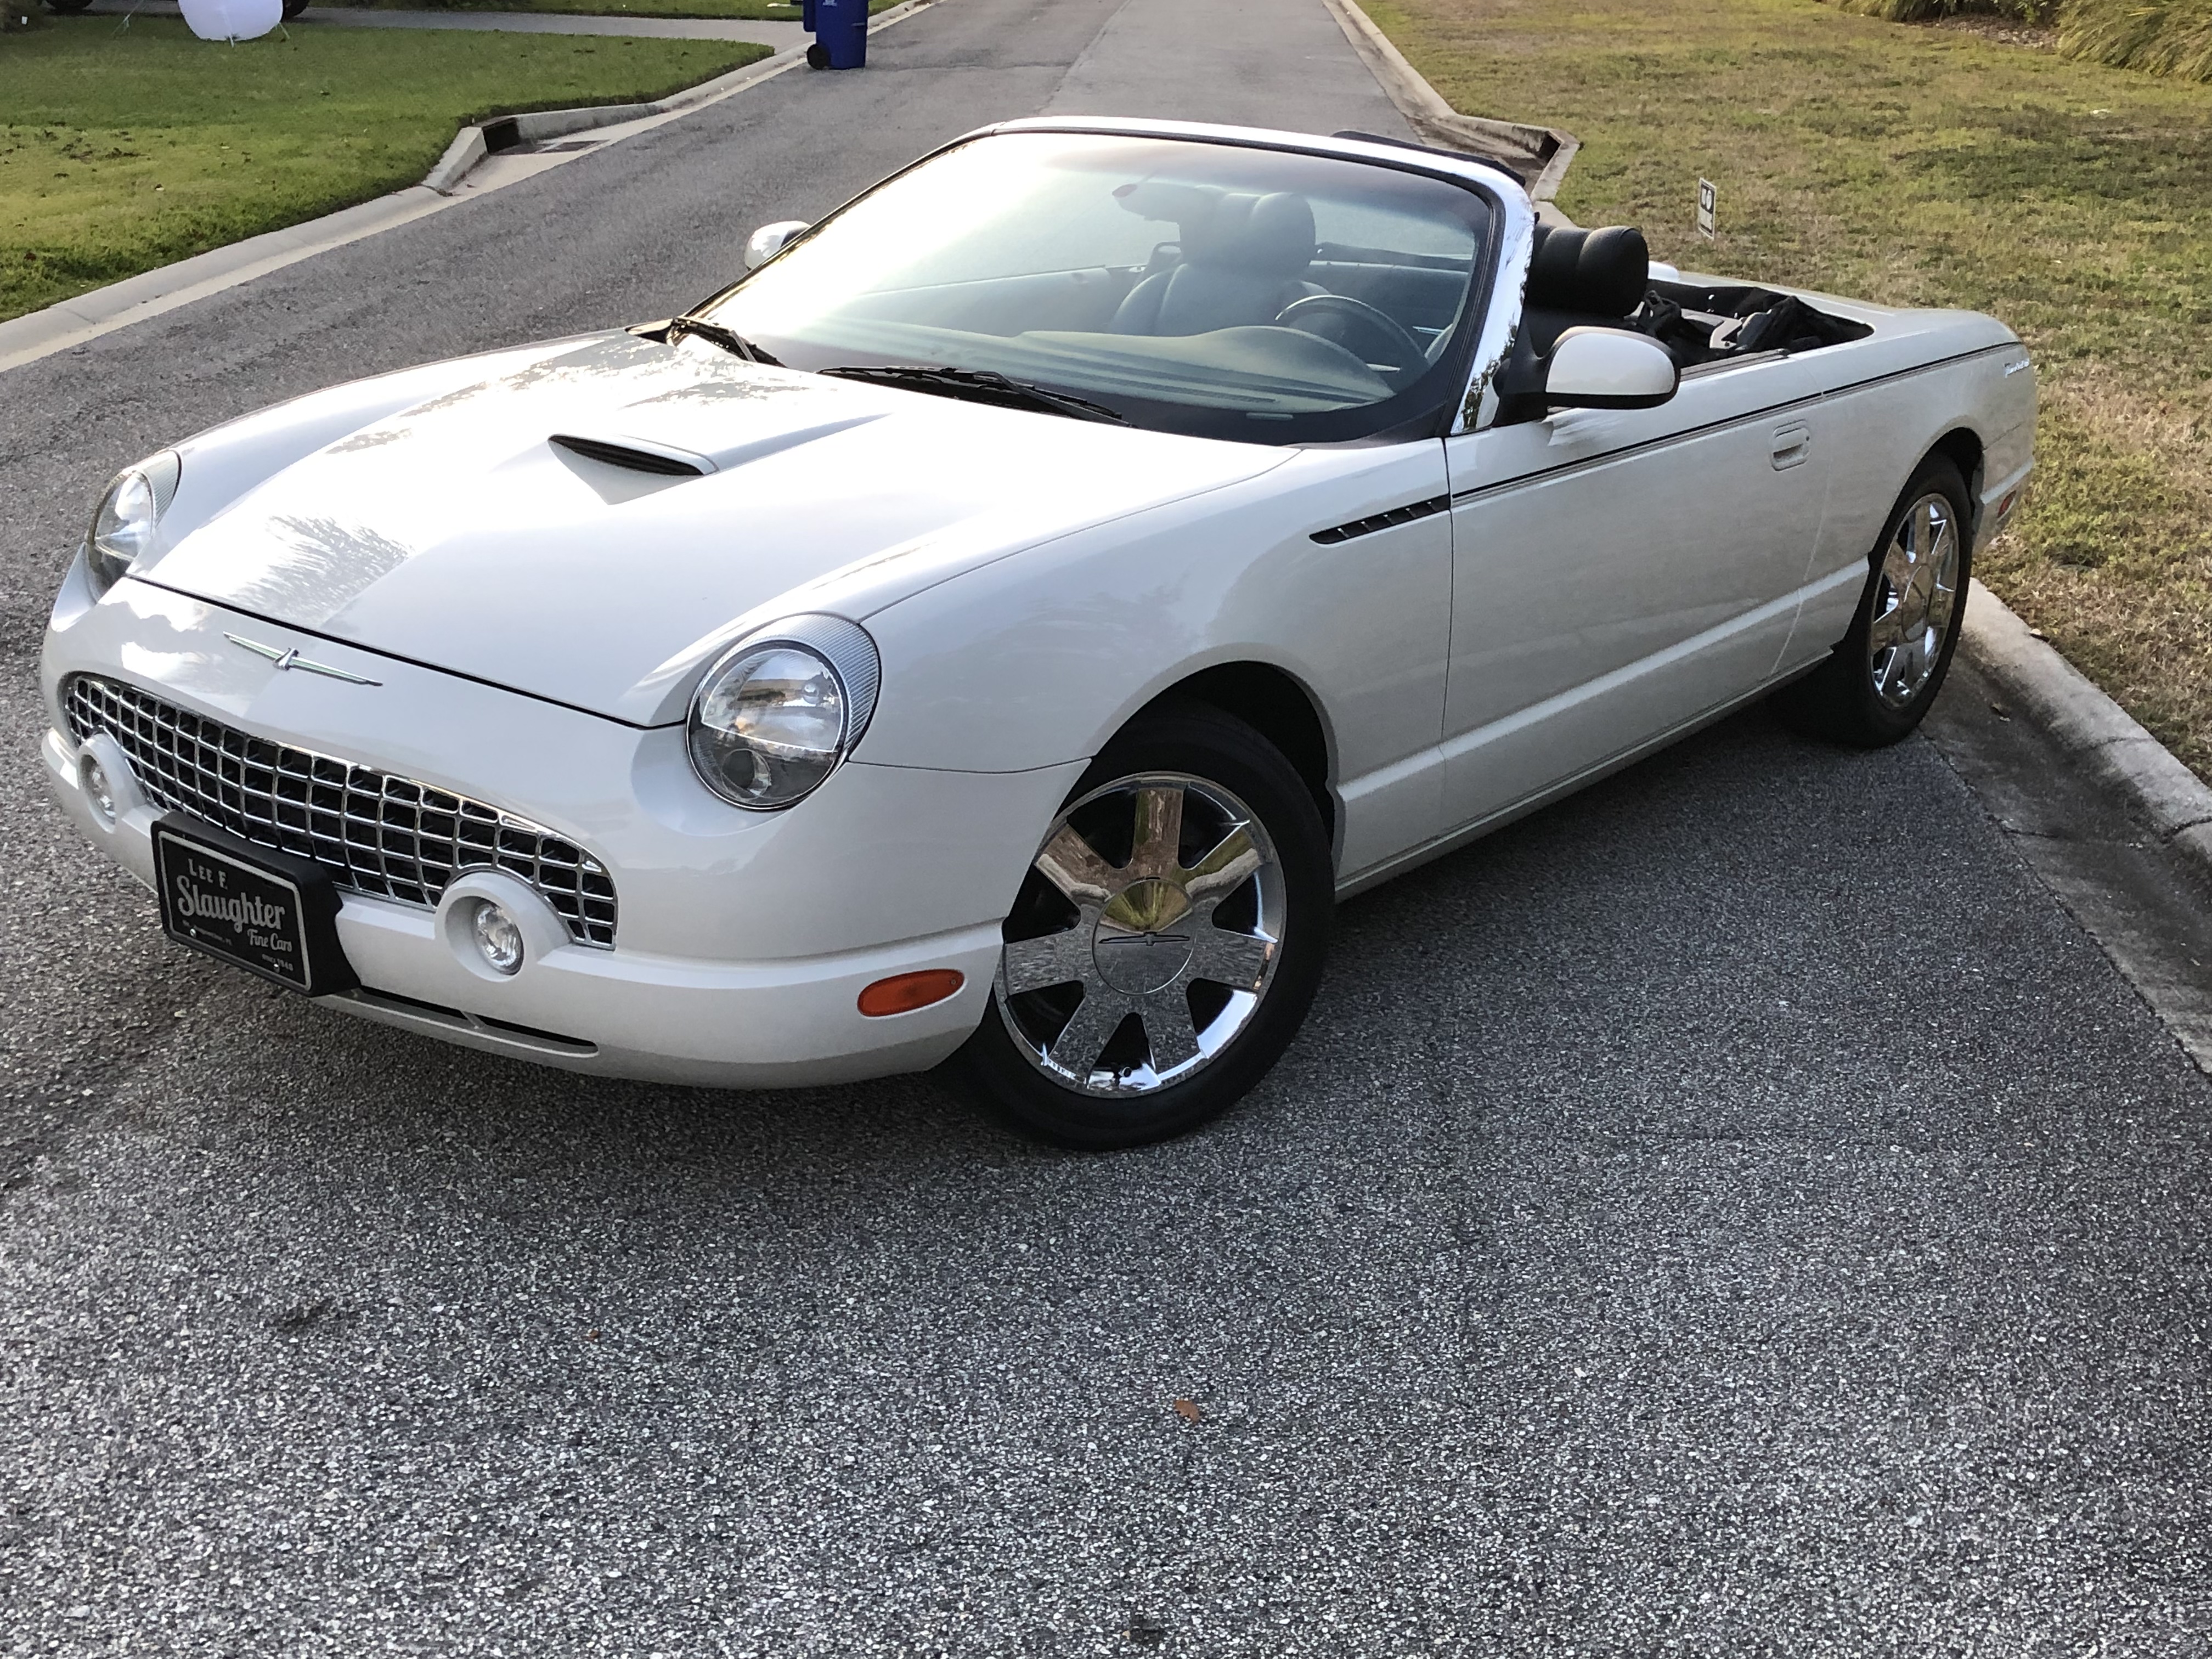 2002 white with black hardtop